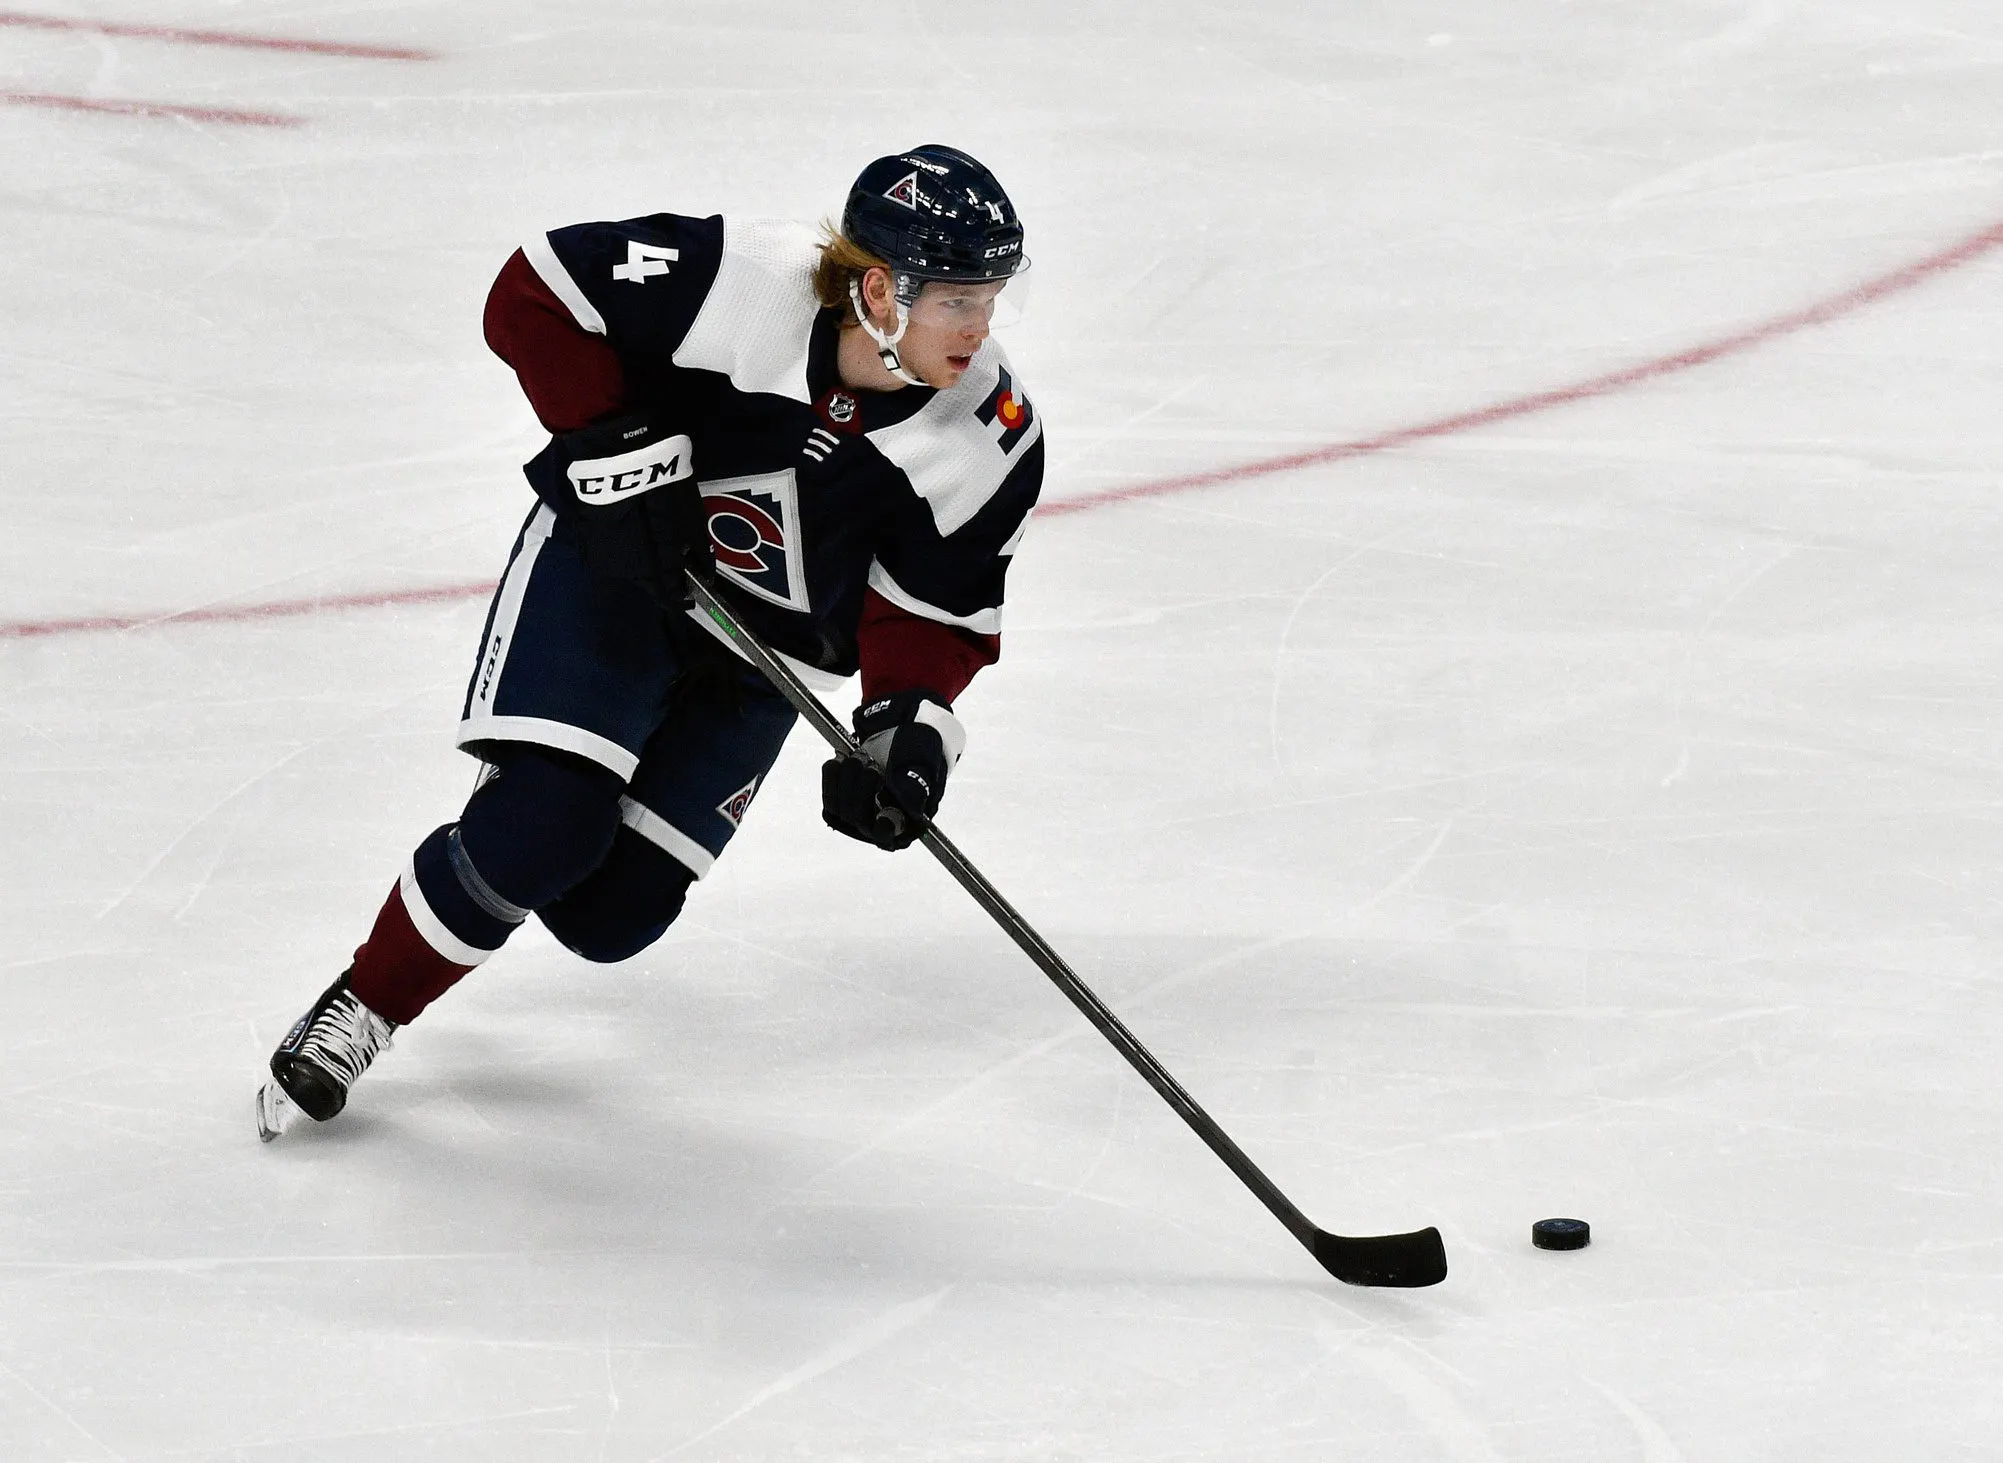 Bo Byram returns to Avalanche after missing three months